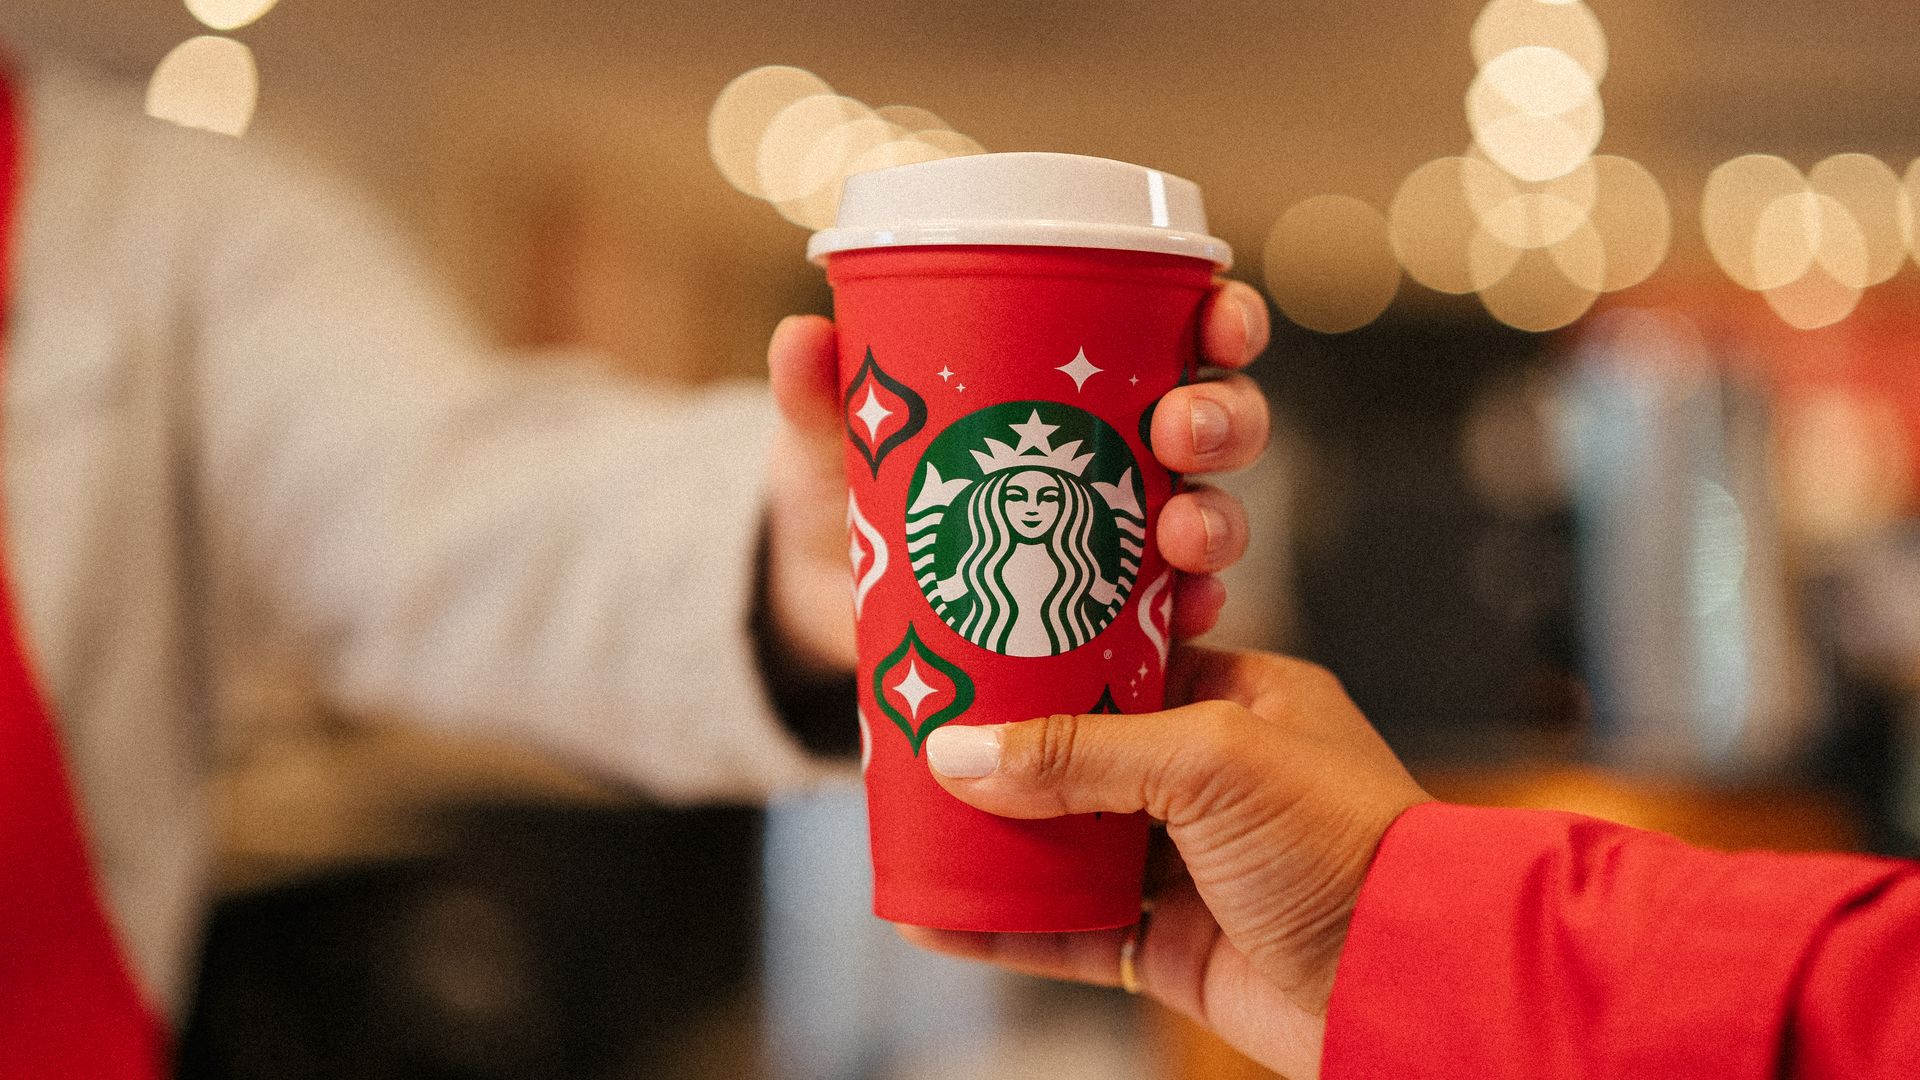 Two hands (one wearing beige shirt and other red shirt) holding a red Starbucks cup